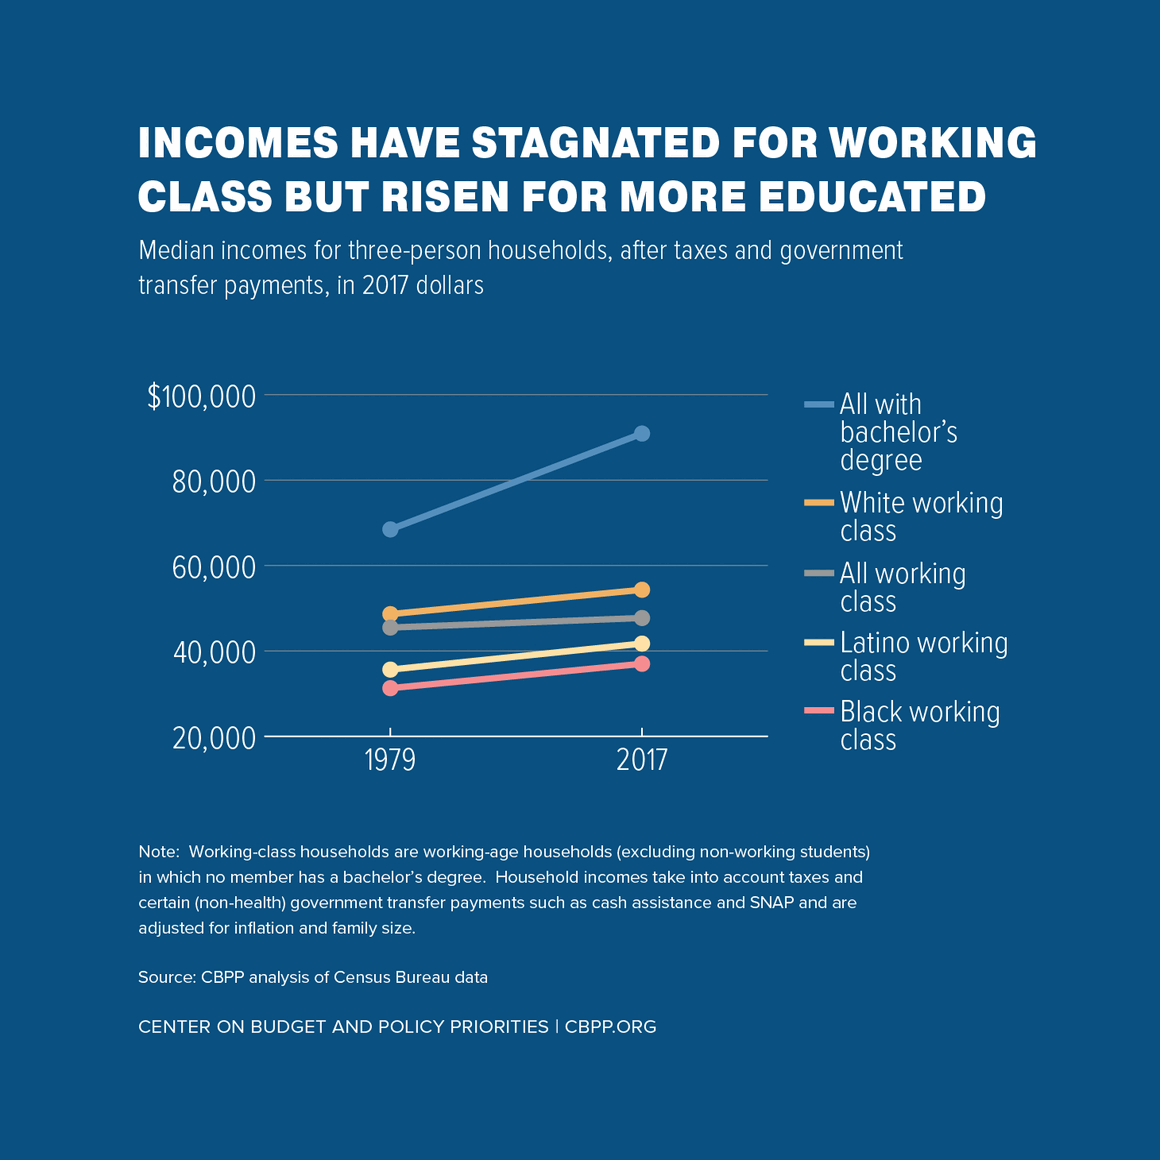 Incomes Have Stagnated for Working Class But Risen for More Educated